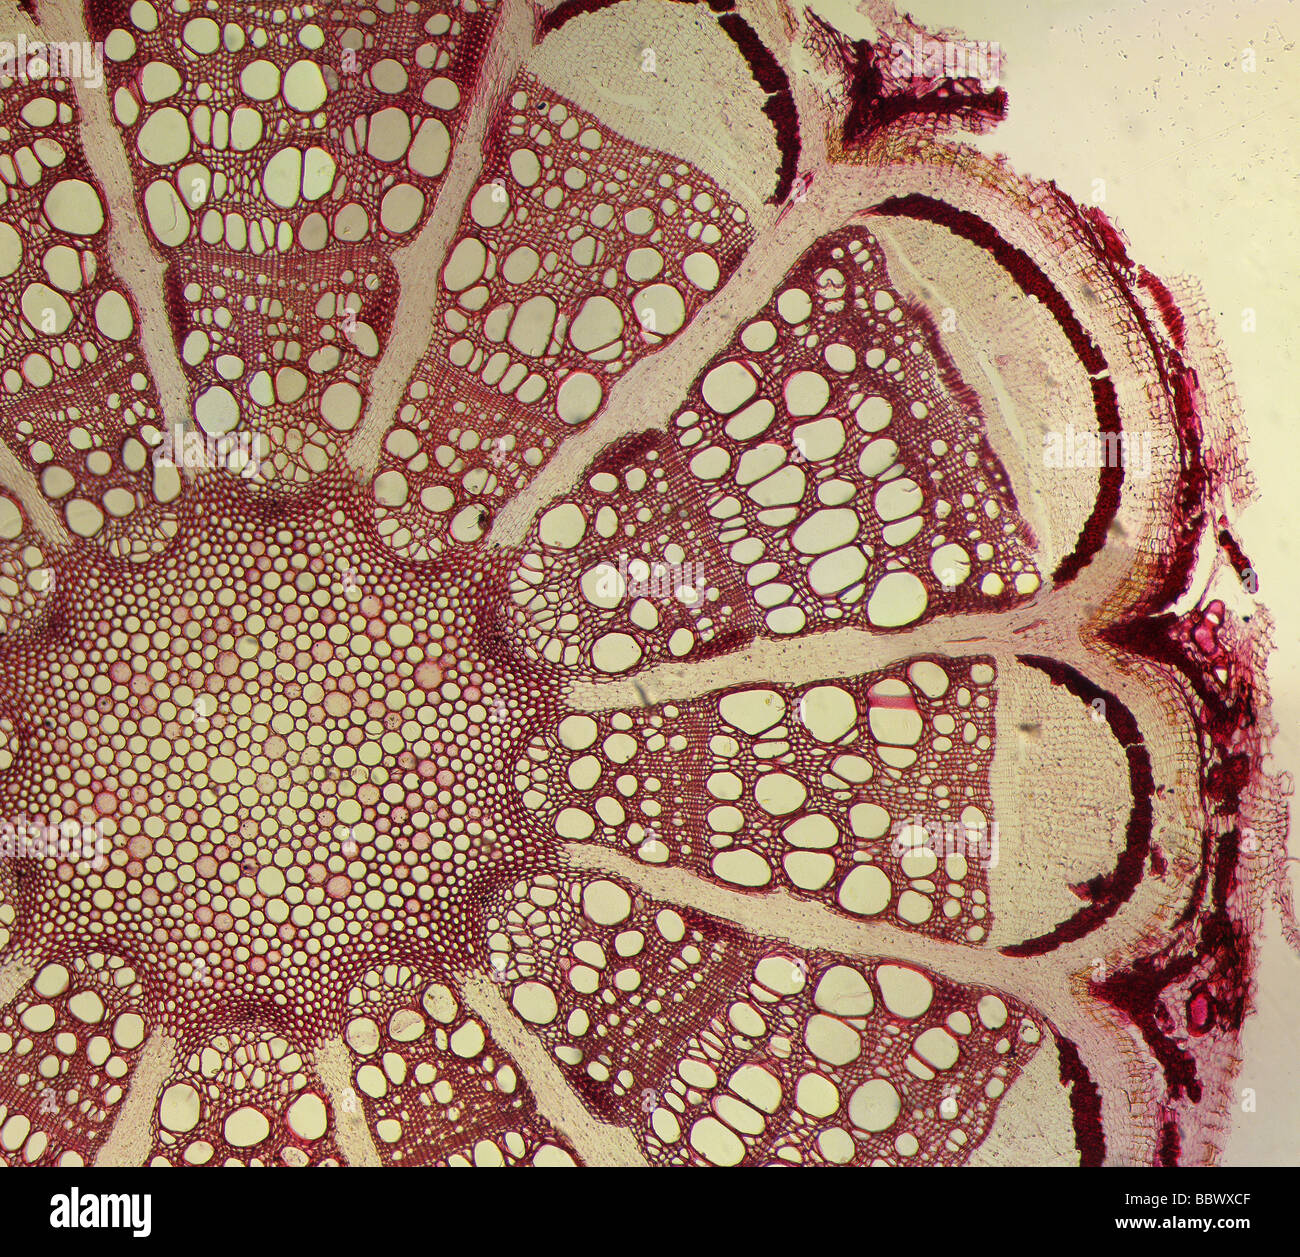 microphotograph of a stained clematis plant stem cross section slide through a microscope Stock Photo